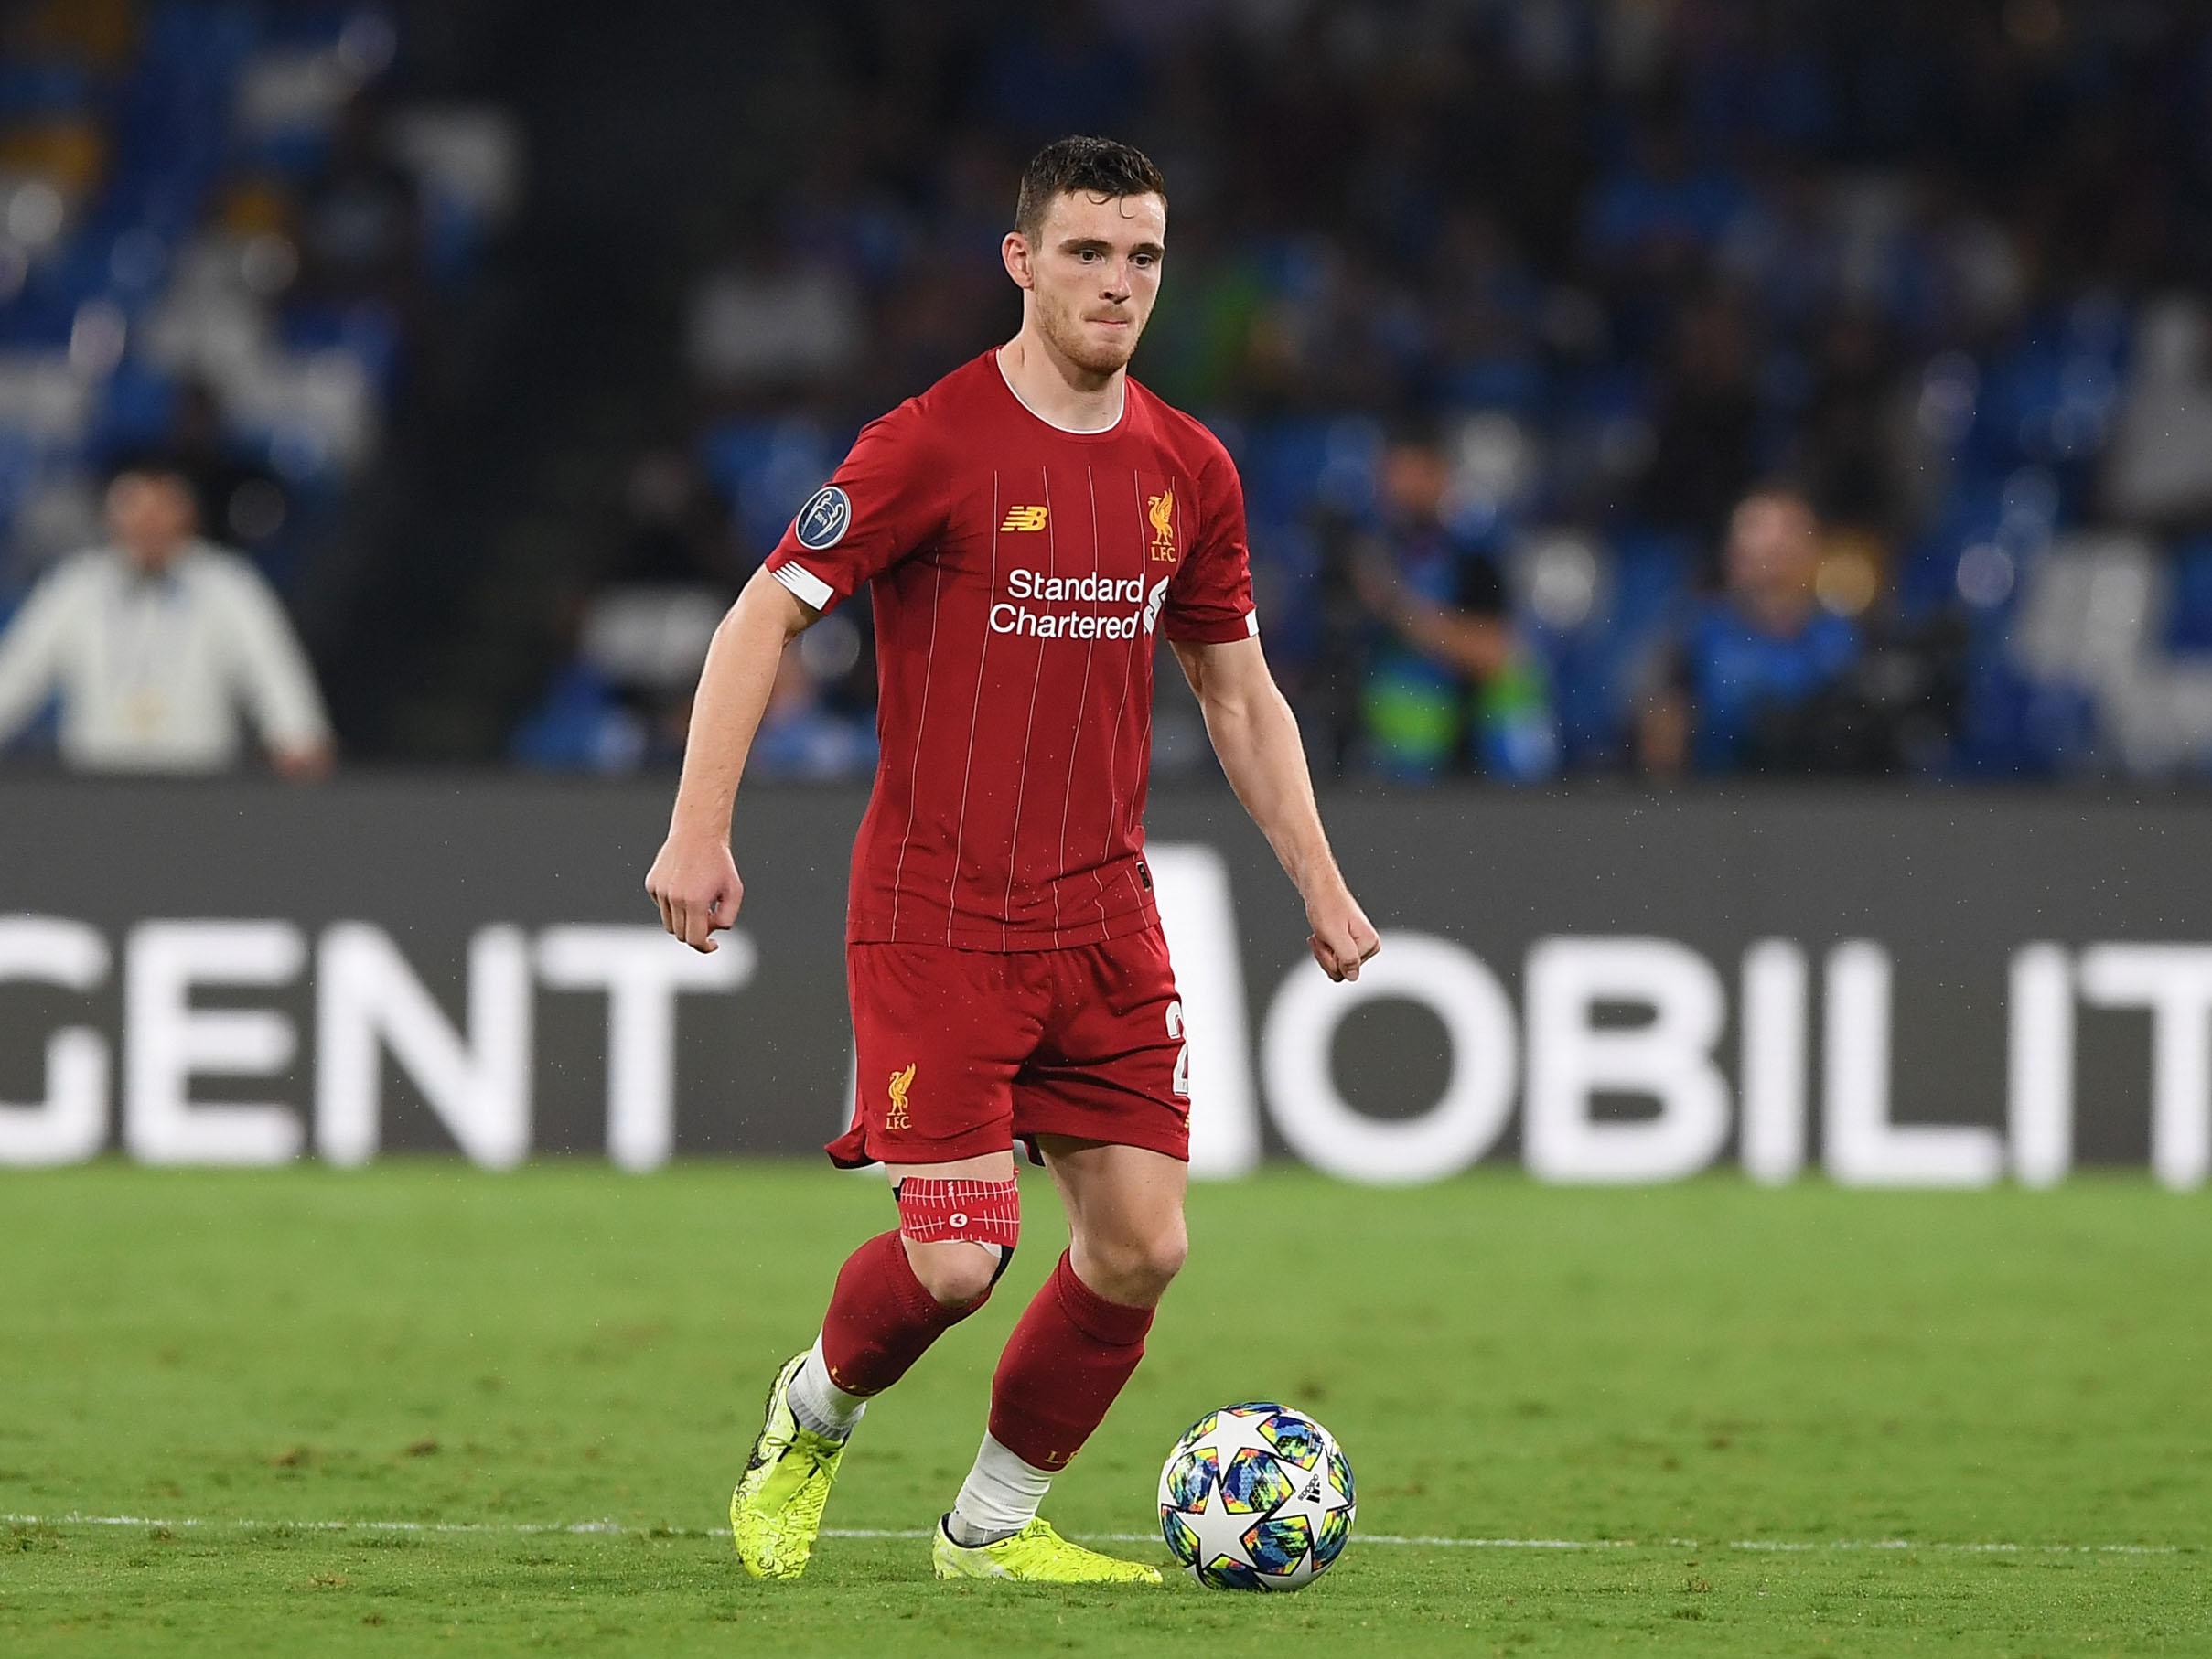 Robertson has established himself as one of the best defenders in the world